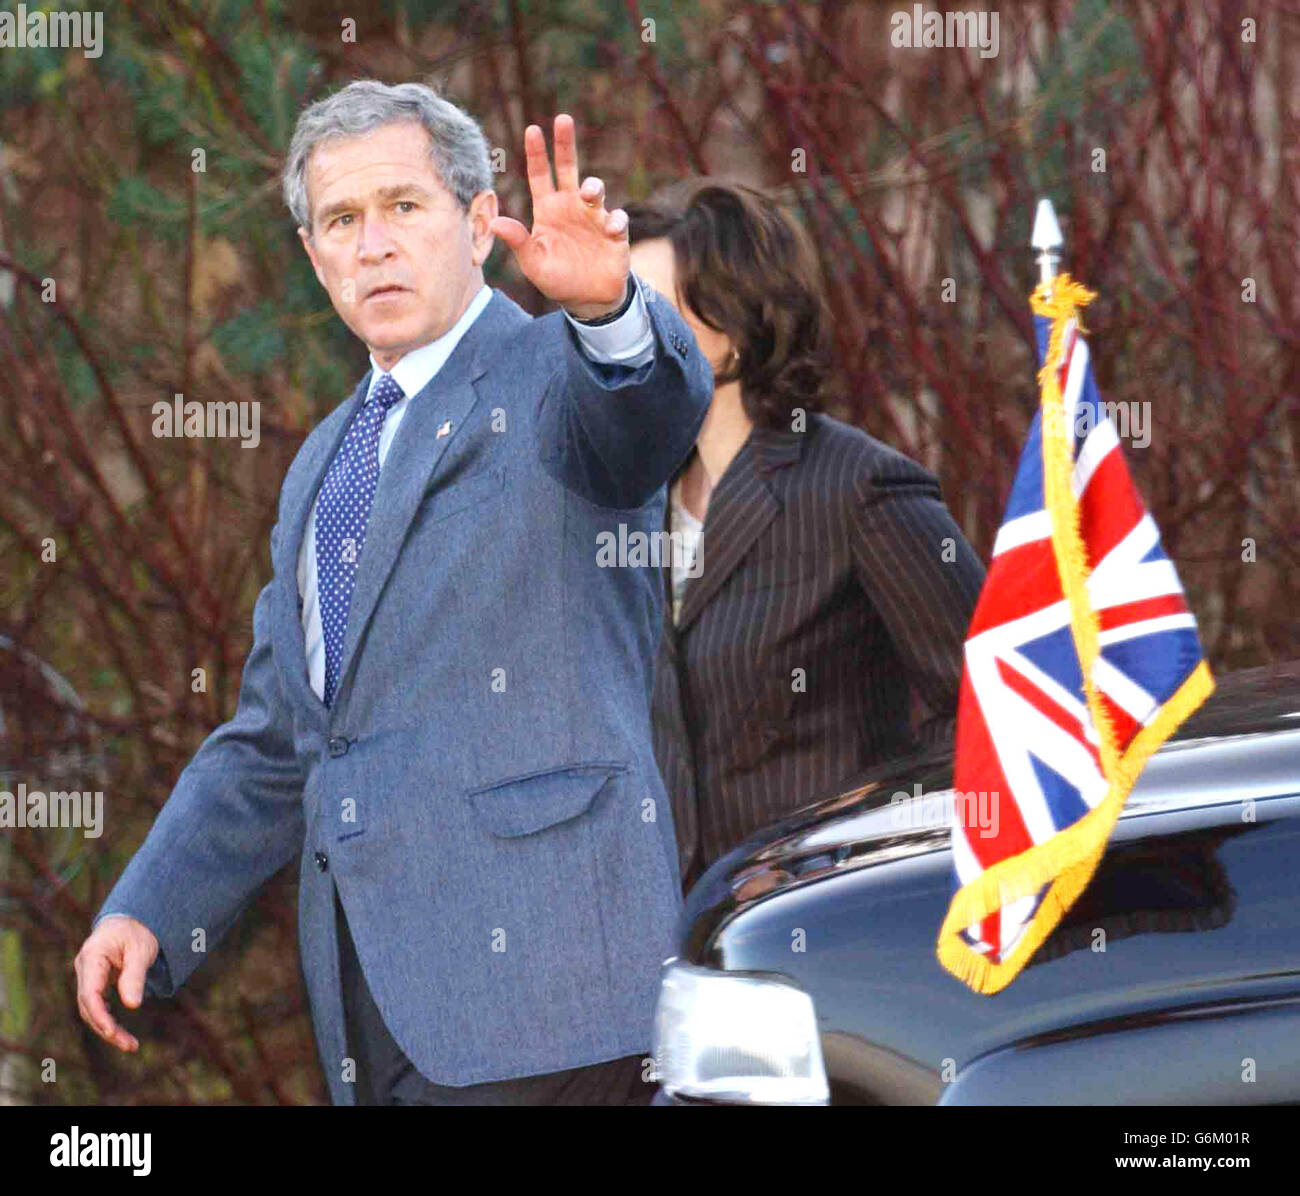 US President George W Bush waves to the crowds as he leaves British Prime Minister Tony Blair constituency home in Sedgefield in County Durham. * It was understood that the trip was designed to offer the chance for the Mr Blair and President Bush to spend time together in more relaxed conditions, following the high-profile speeches, political discussions and pageantry of the past two days. Stock Photo